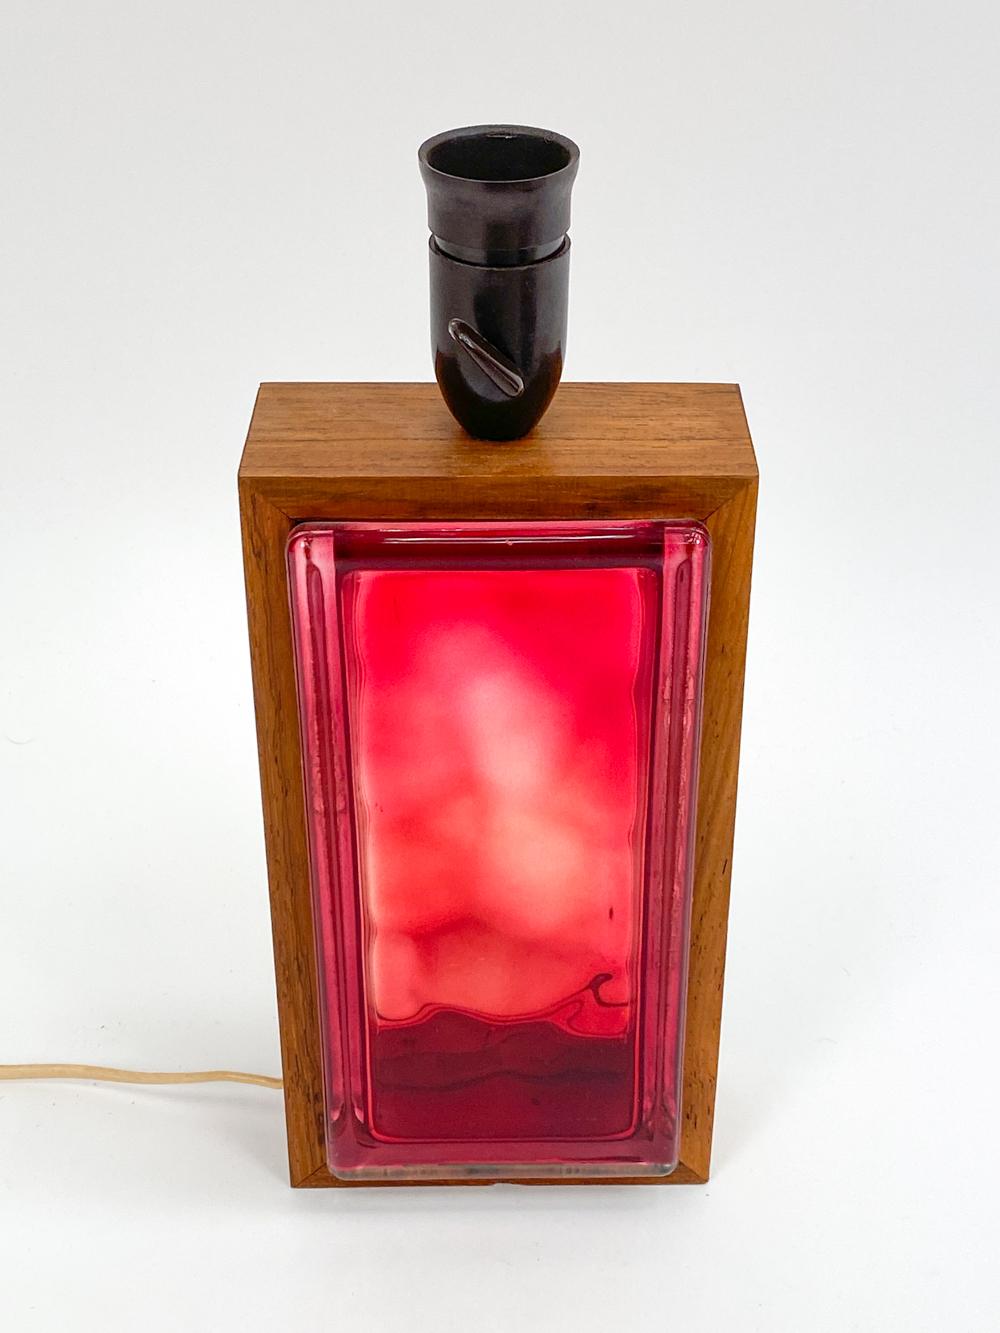 Step into the radiant world of 1960's Swedish design with this dazzling table lamp, in which a fiery red glass block forms an unexpected match with opulent rosewood. An artifact of an age when design broke barriers, this lamp encapsulates the daring